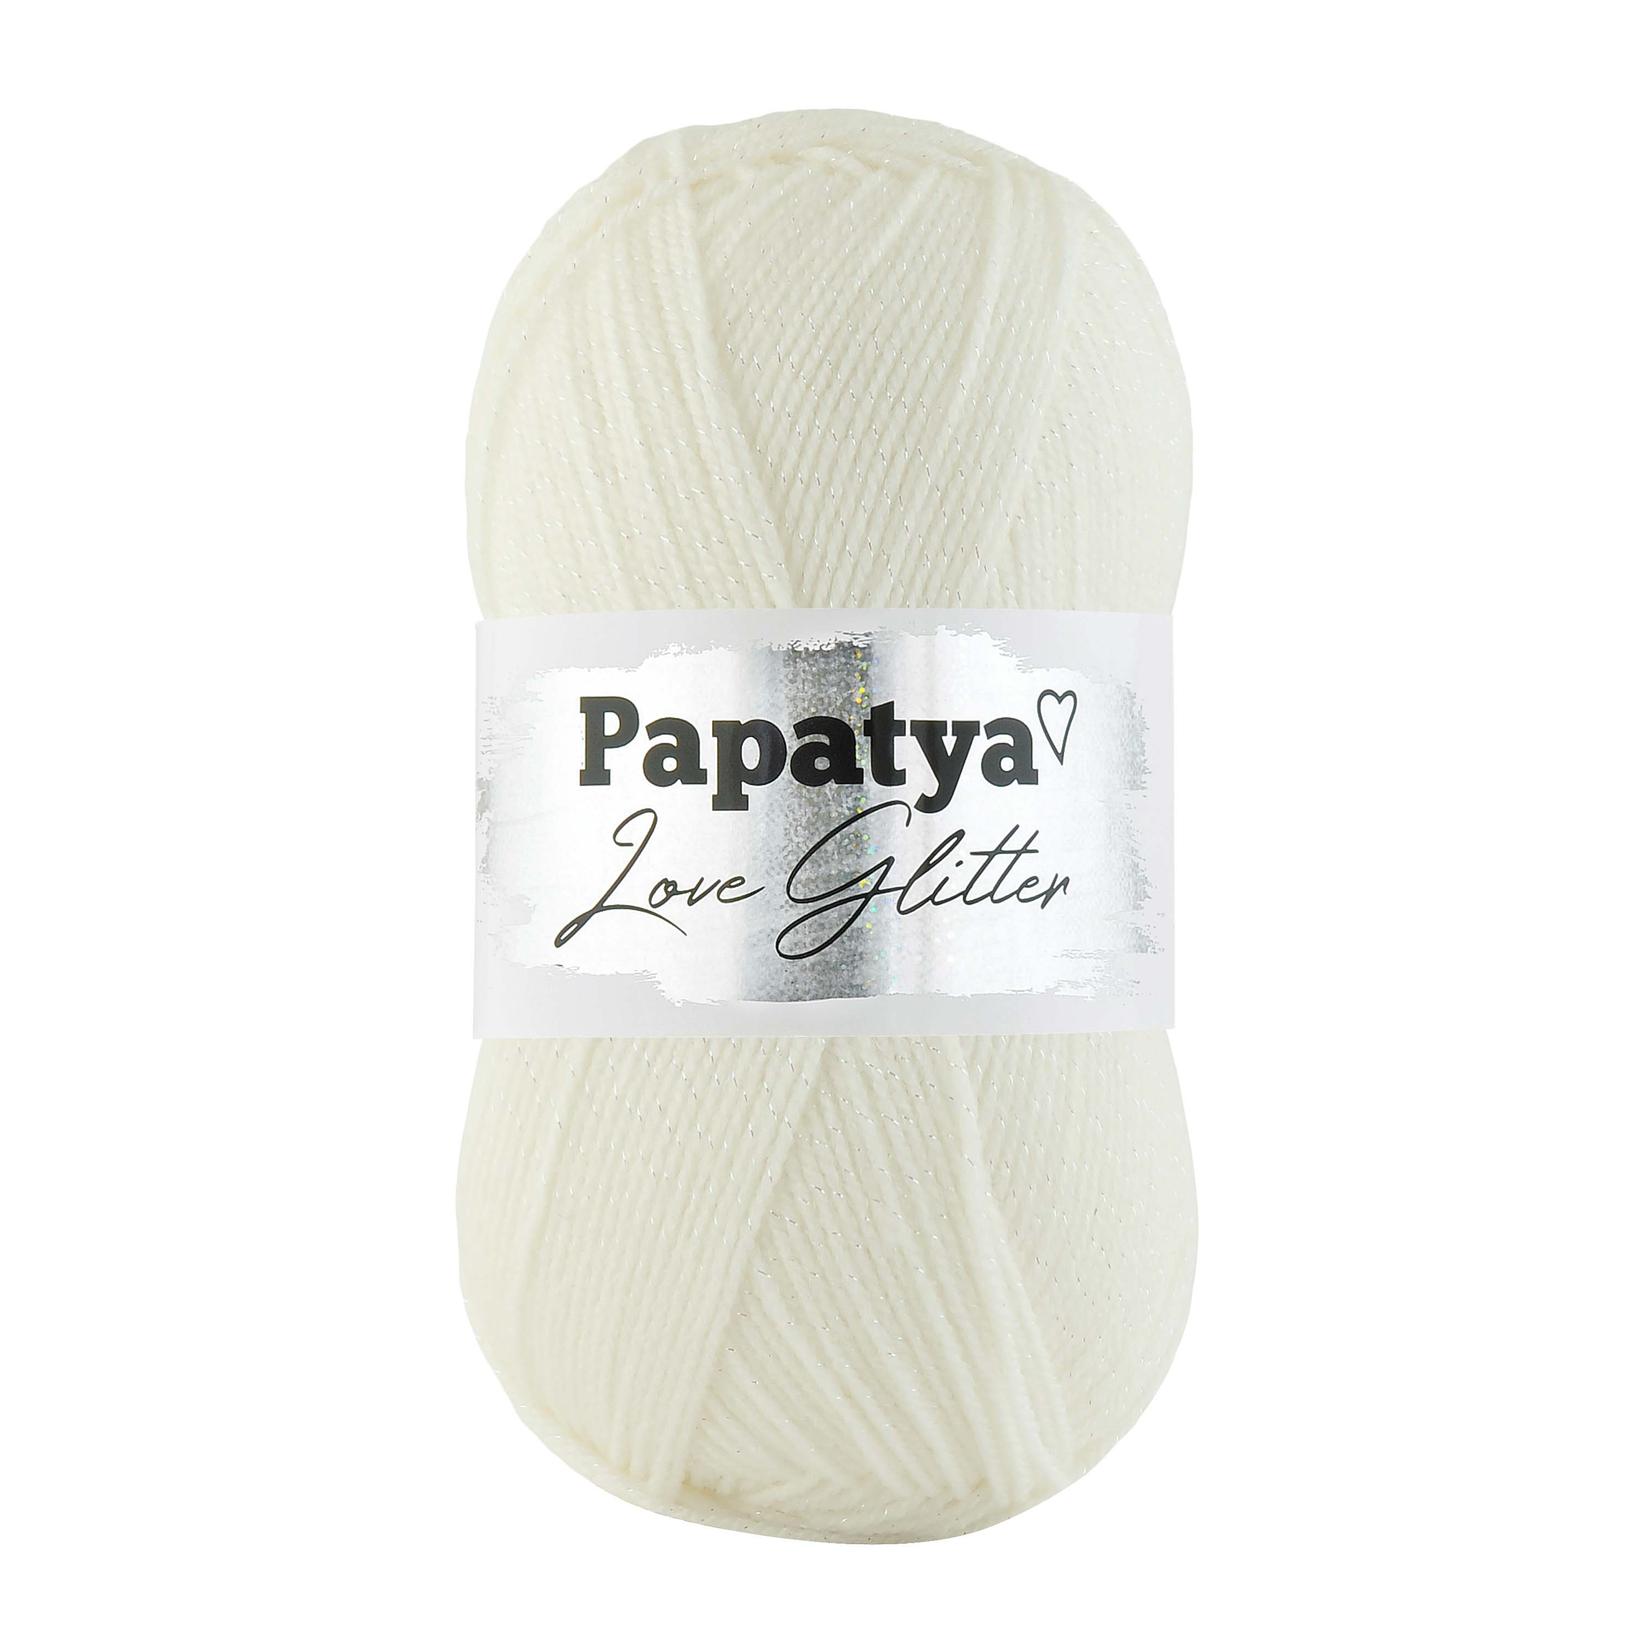 Selected image for PAPATYA Vunica Love Glitter 1200